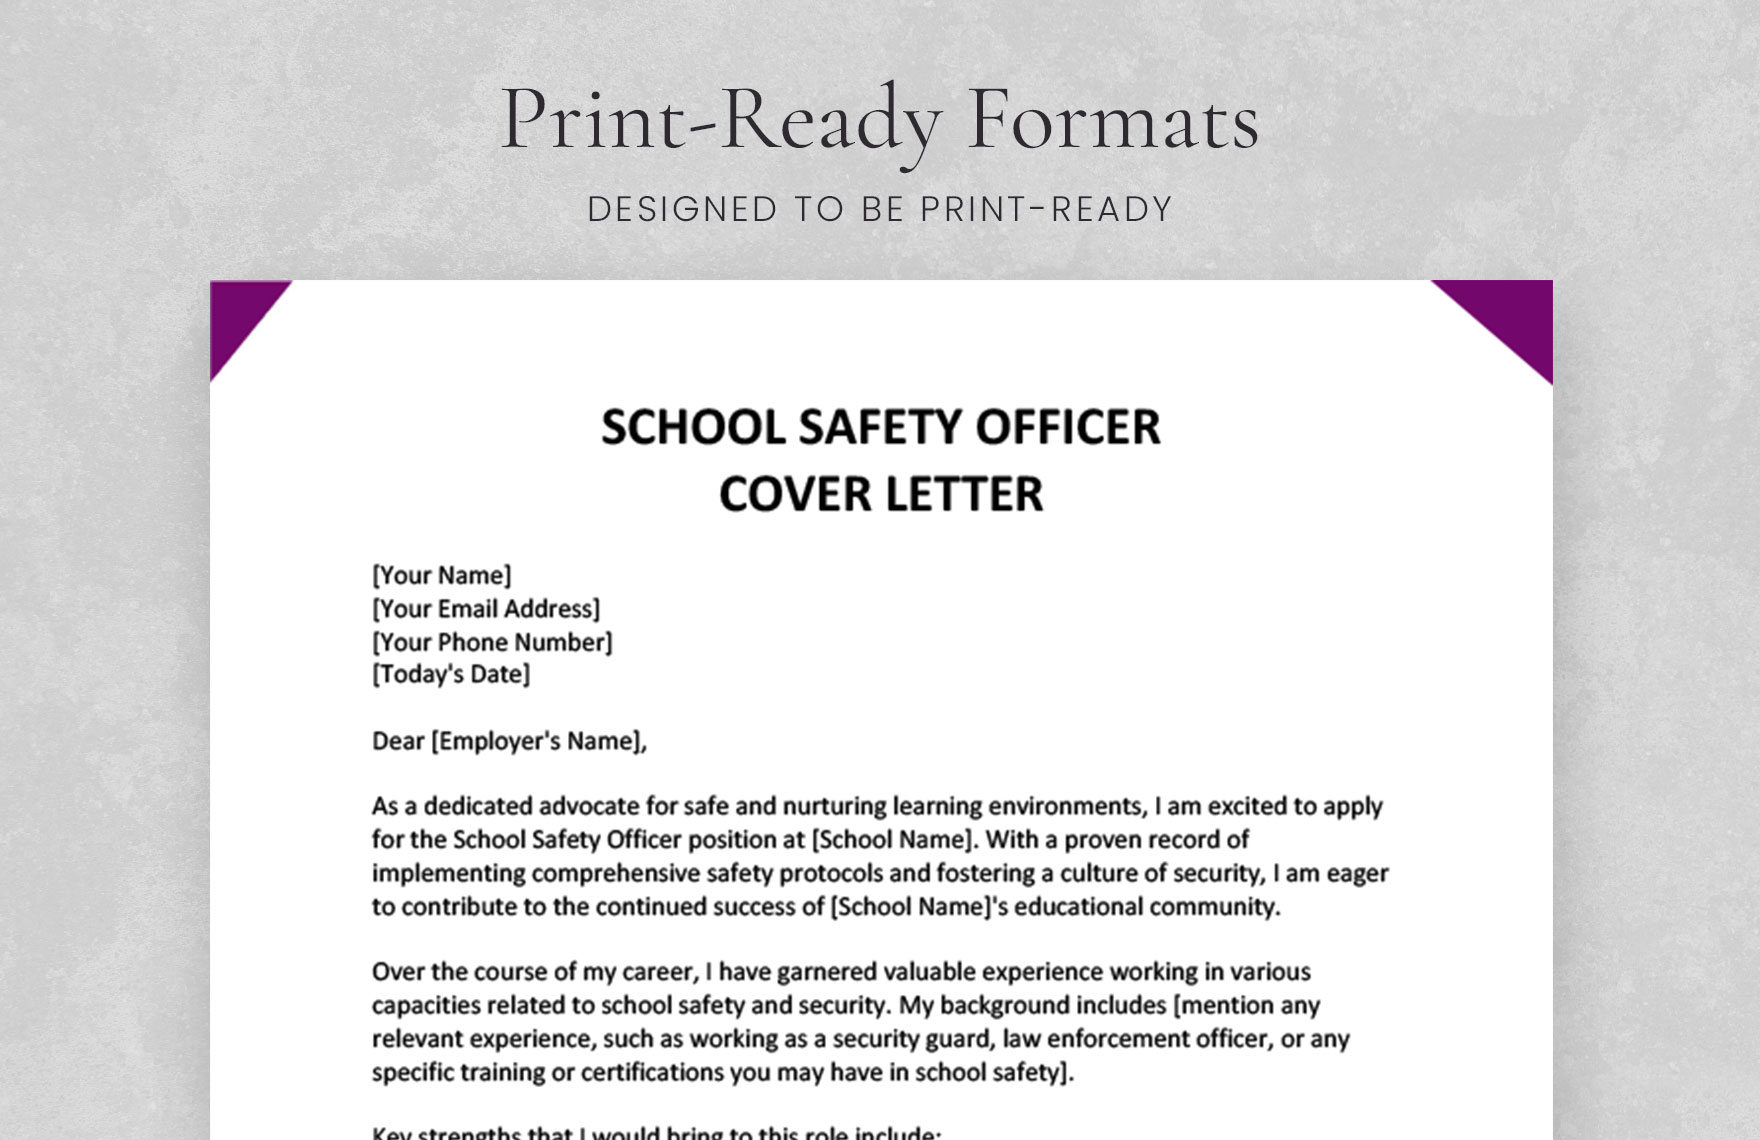 School Safety Officer Cover Letter